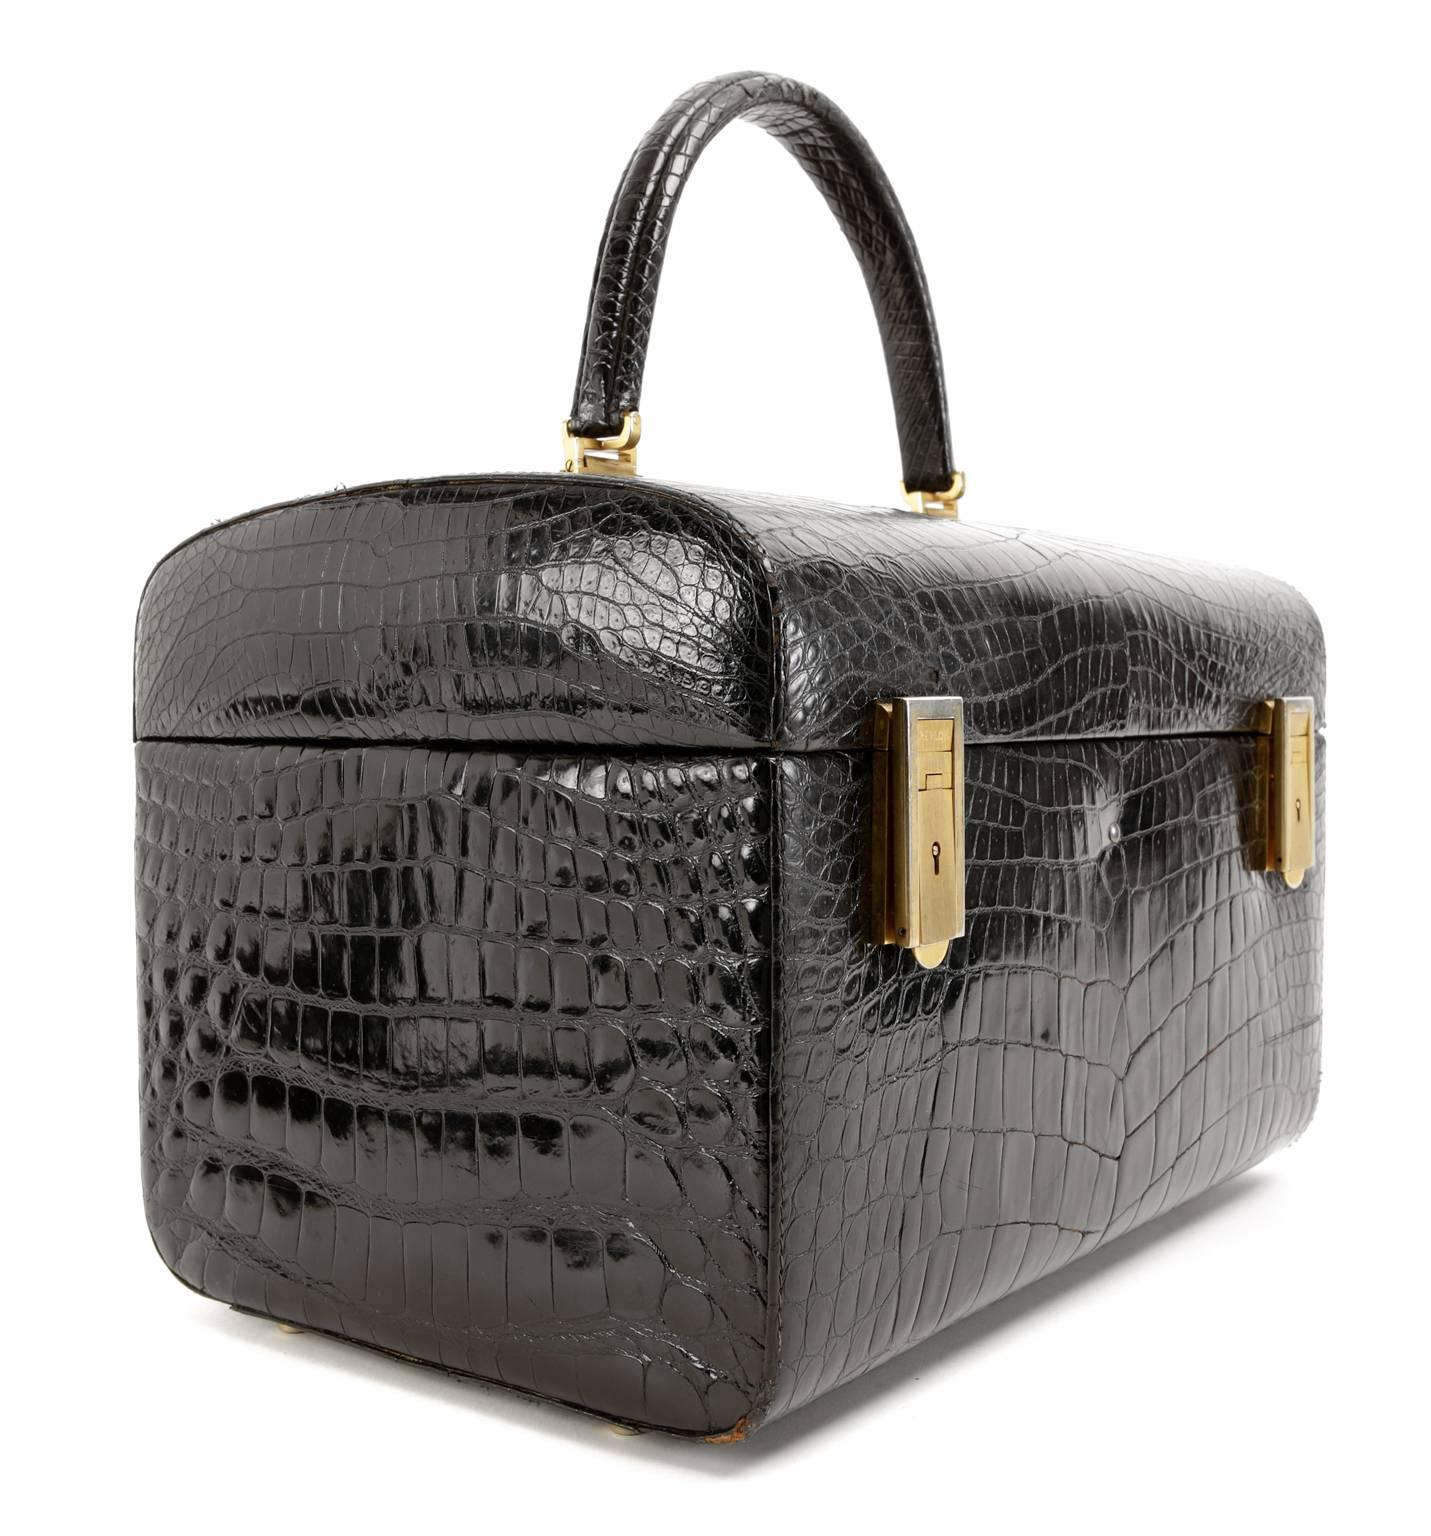 Revlon Black Crocodile Custom Cosmetics Case- EXCELLENT
Very rare, this totally unique piece is a must have for collectors. 
 
Black crocodile case has double clasp opening in matte gold tone hardware.  The top of the case opens to reveal a